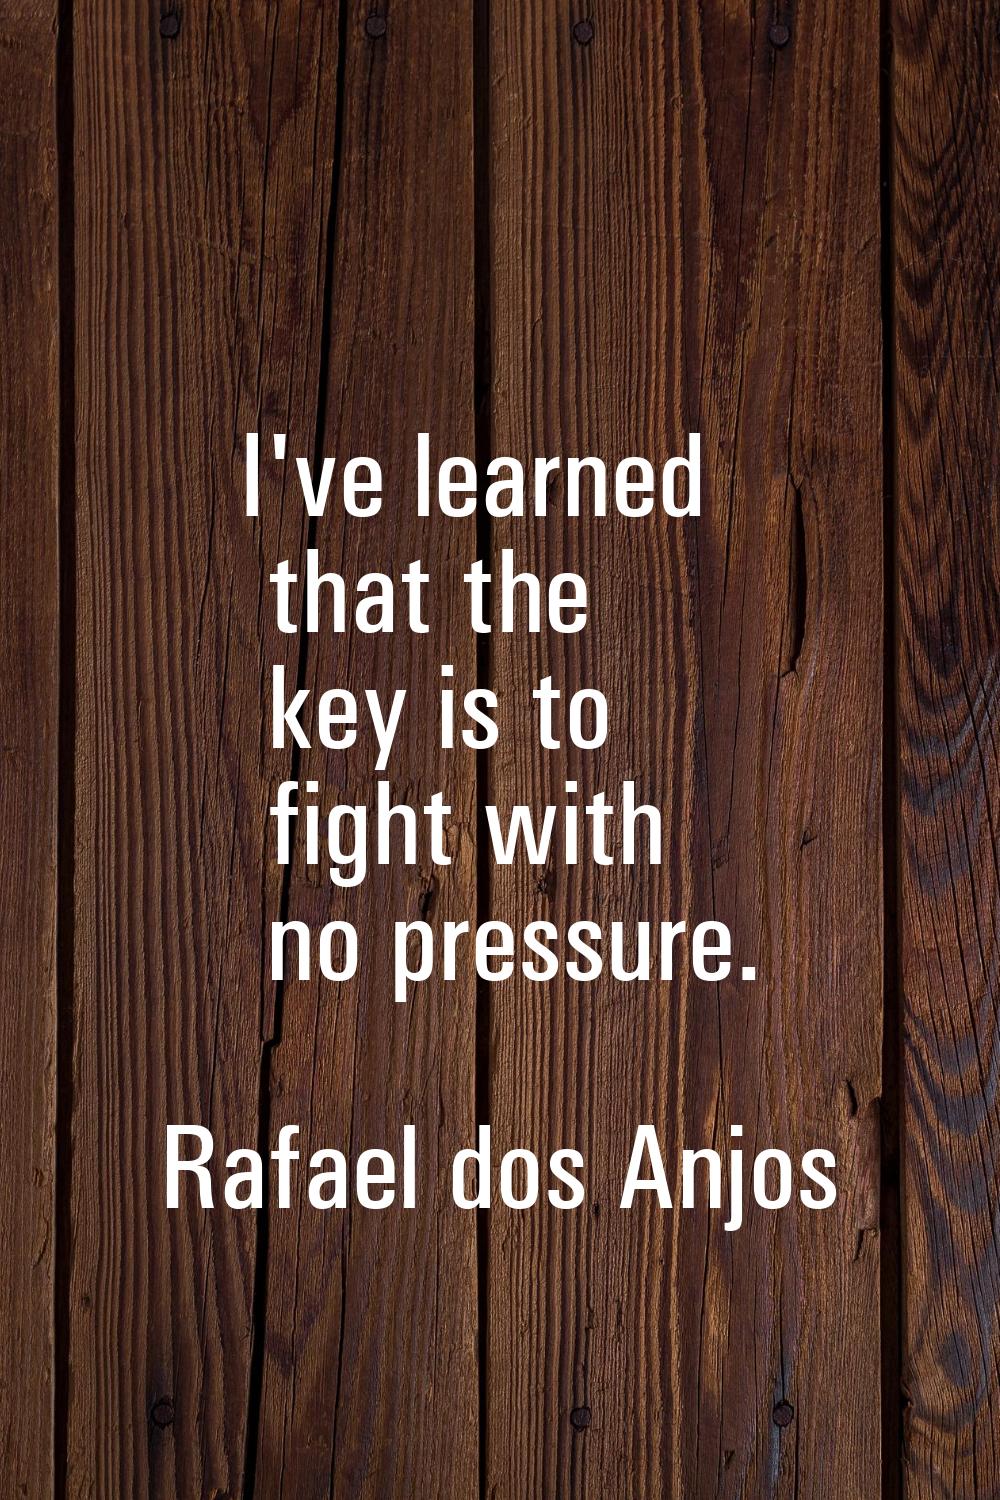 I've learned that the key is to fight with no pressure.